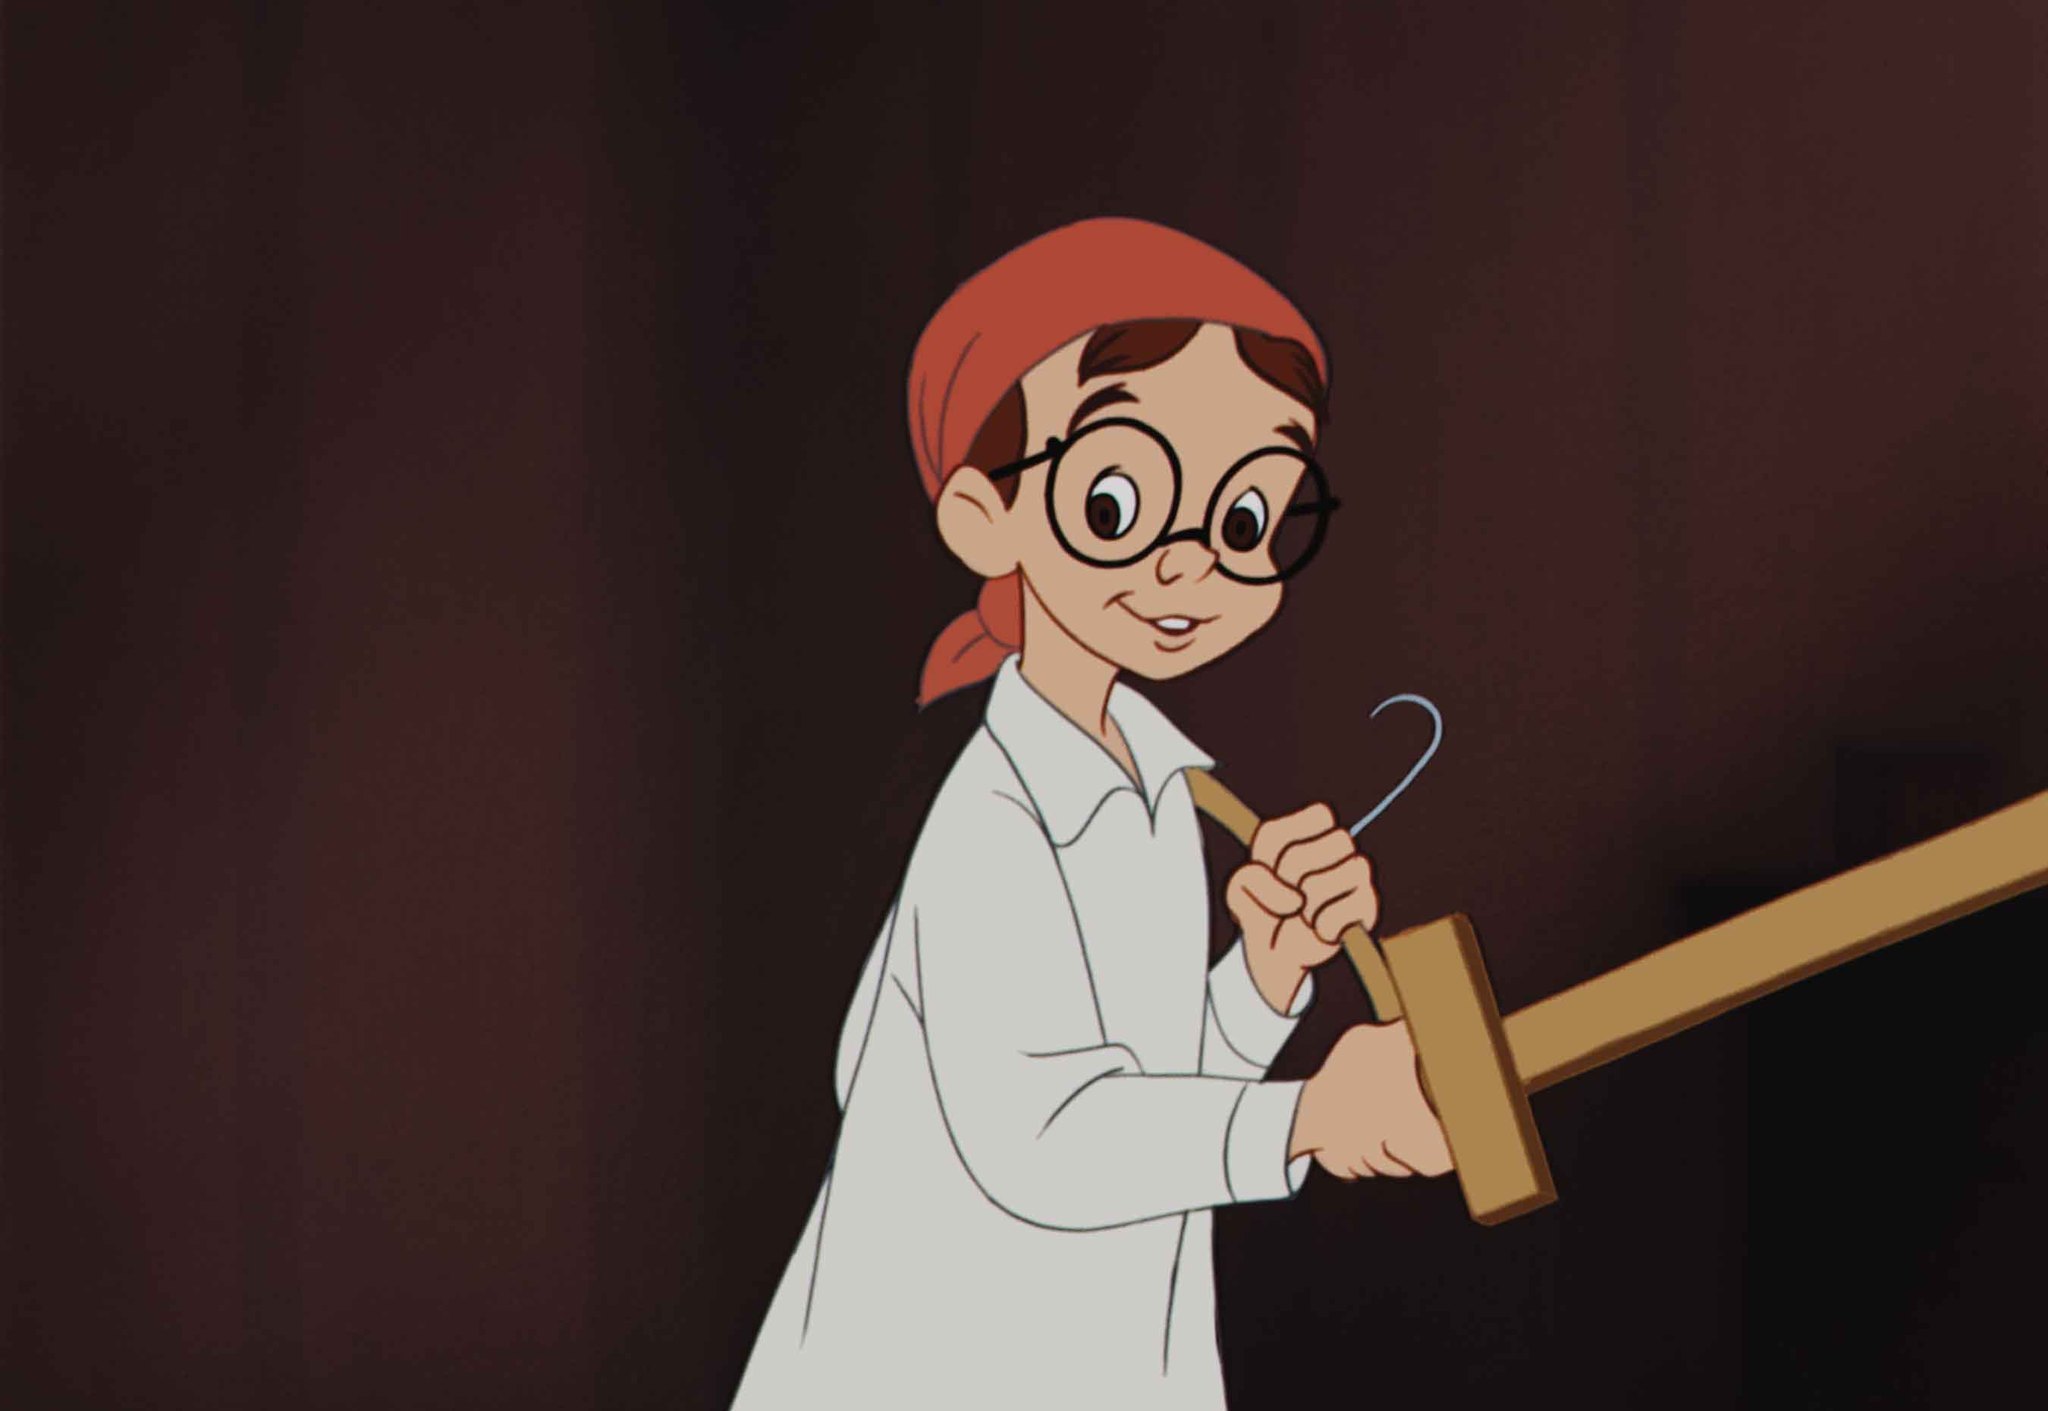 John Darling is one of the first main characters from disney